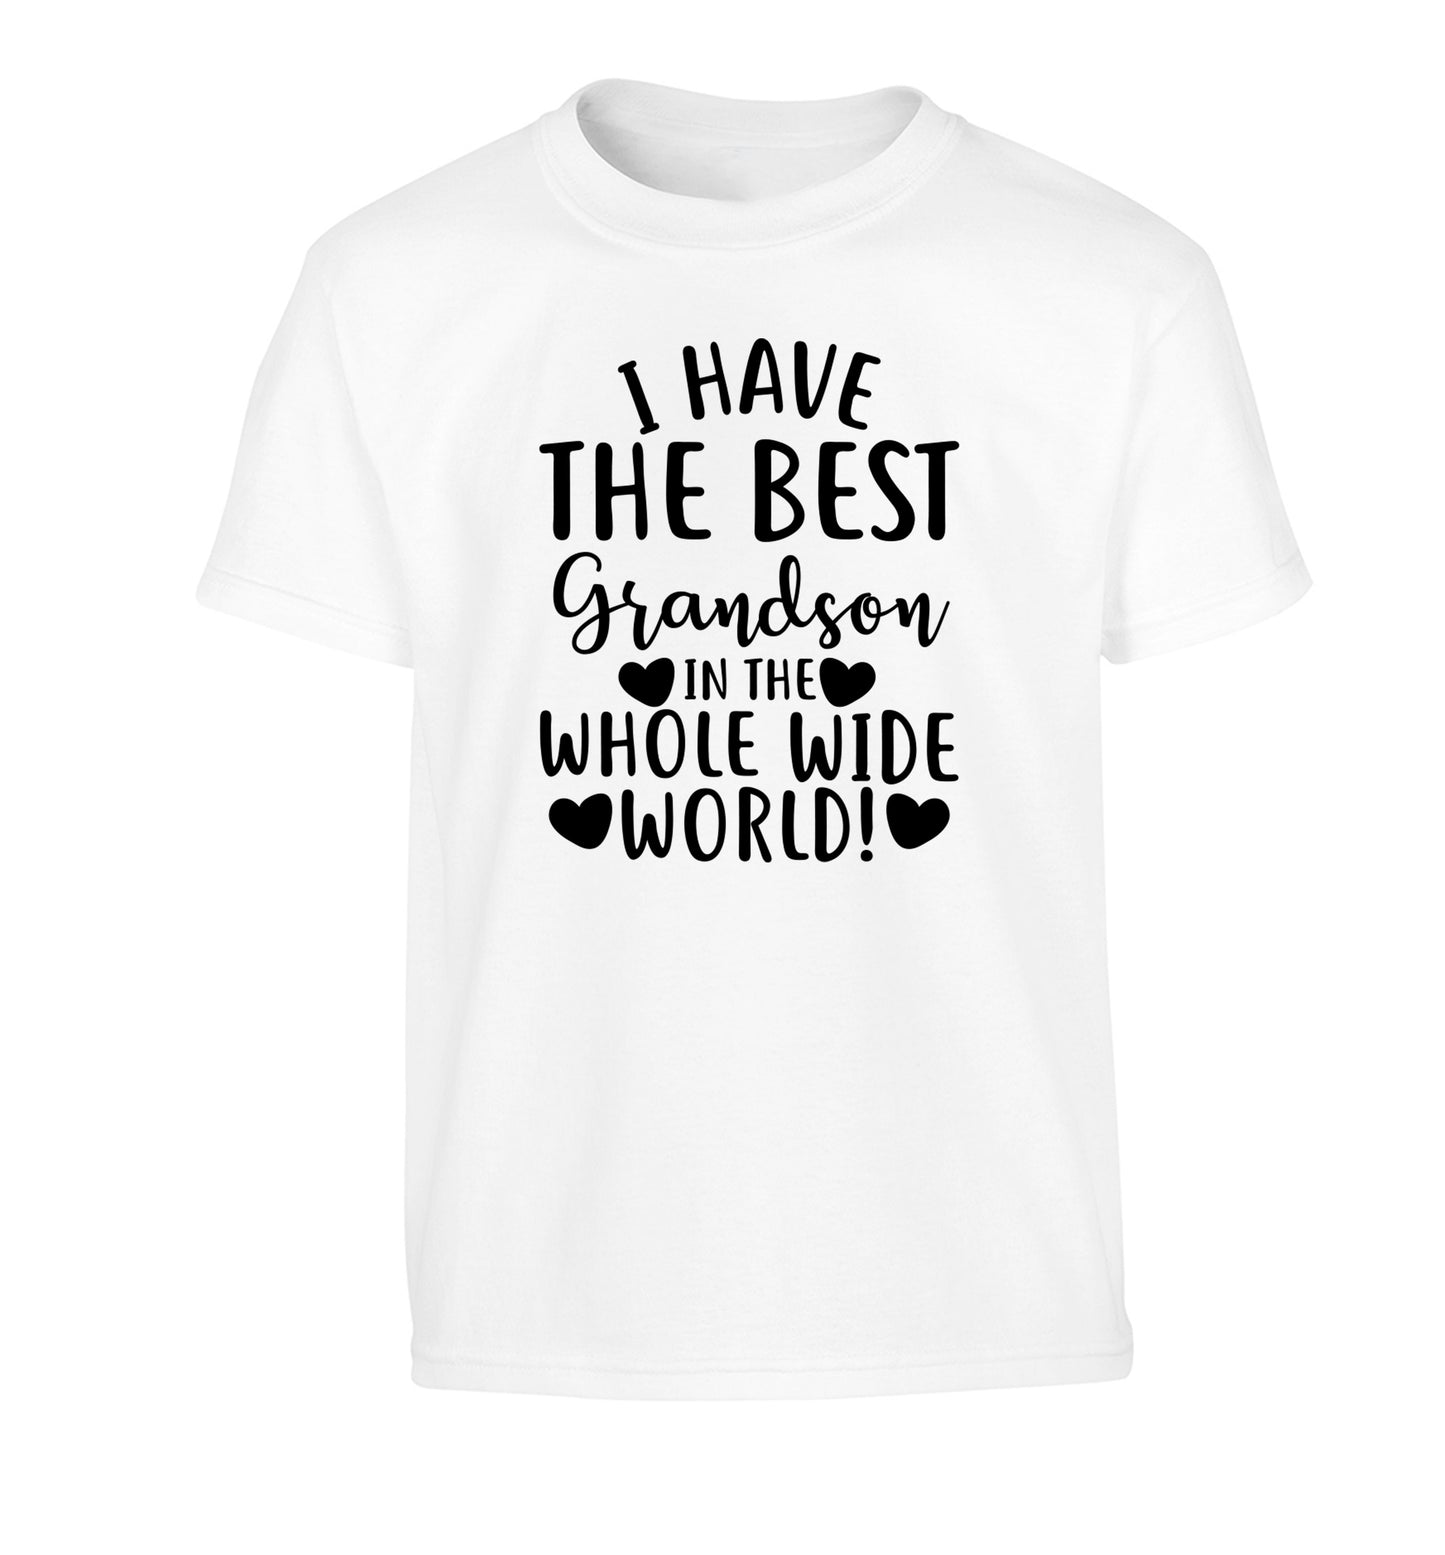 I have the best grandson in the whole wide world! Children's white Tshirt 12-13 Years